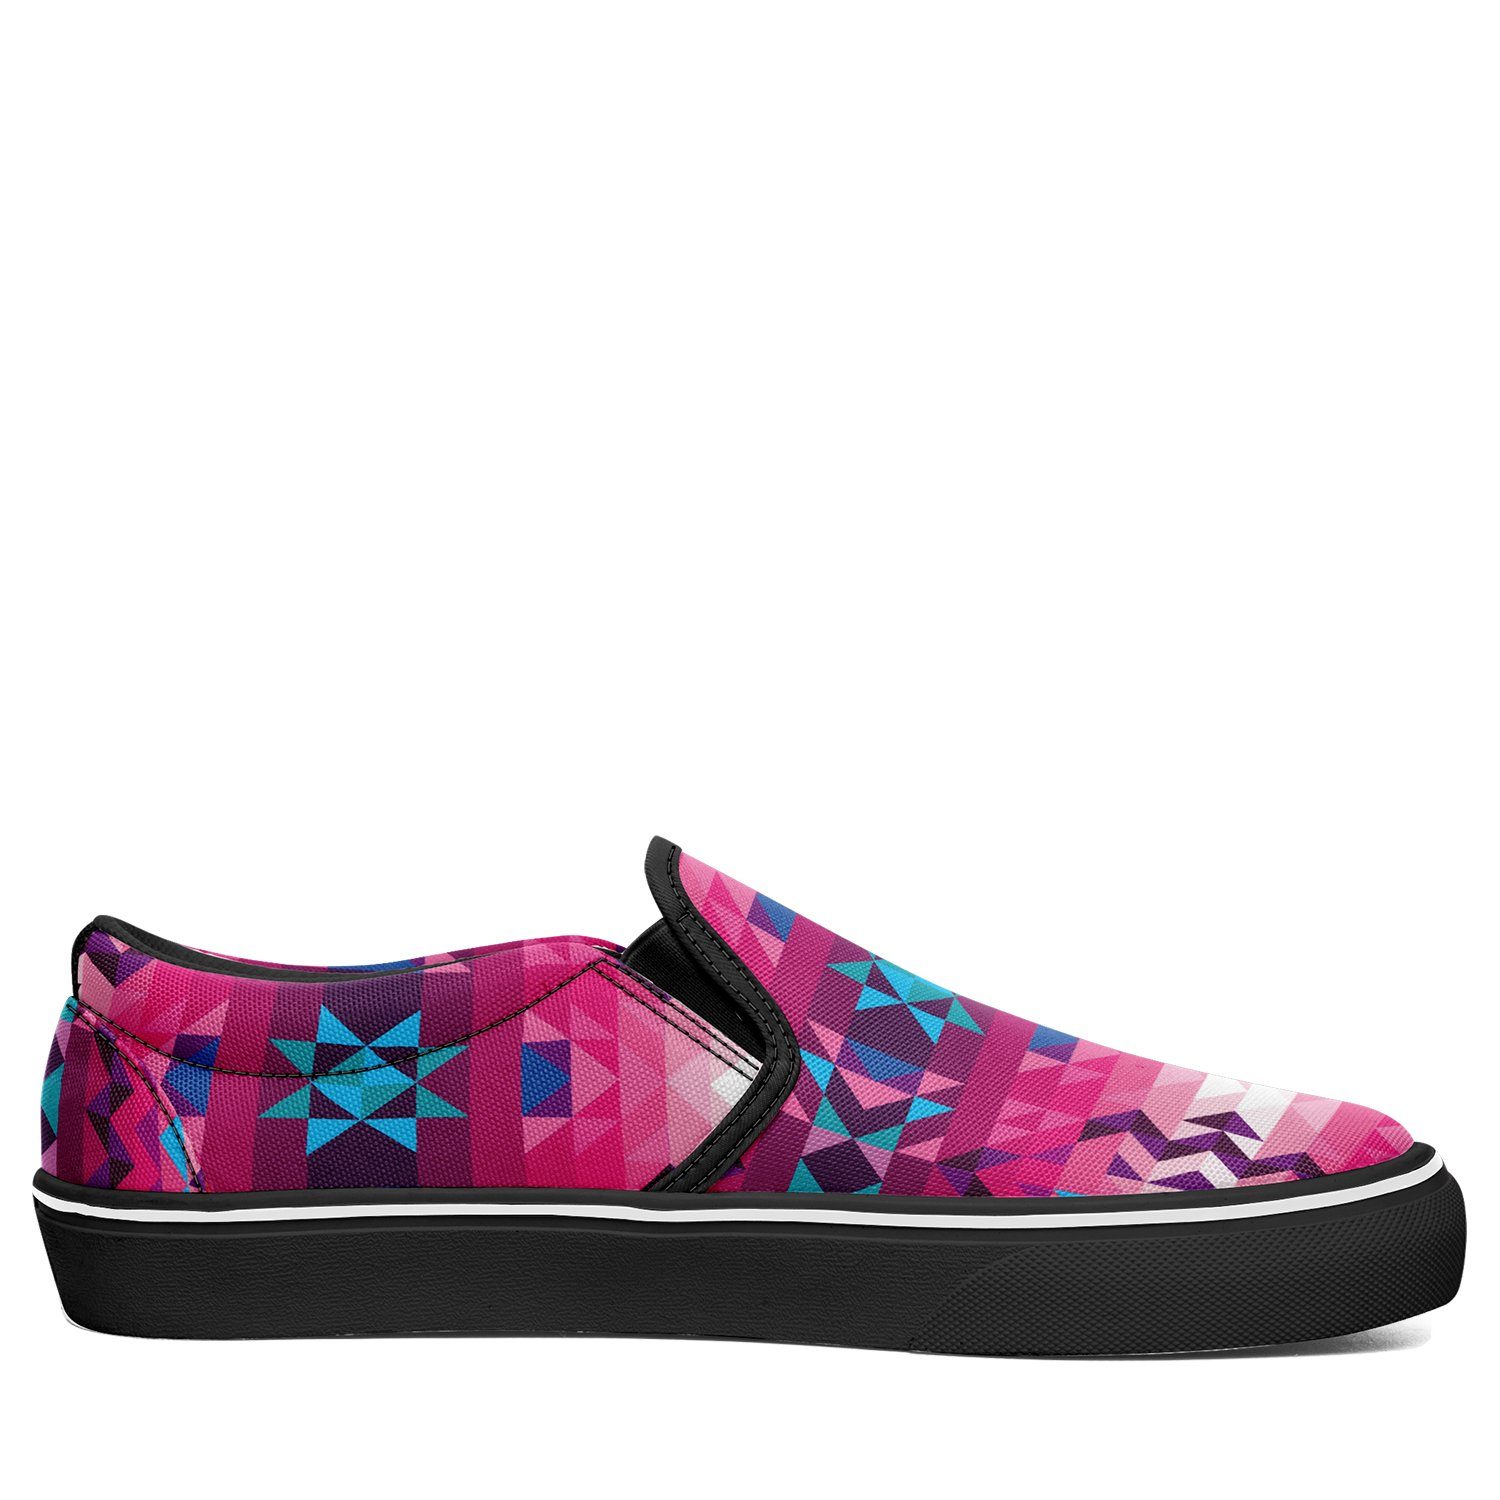 Bright Wave Otoyimm Canvas Slip On Shoes otoyimm Herman 